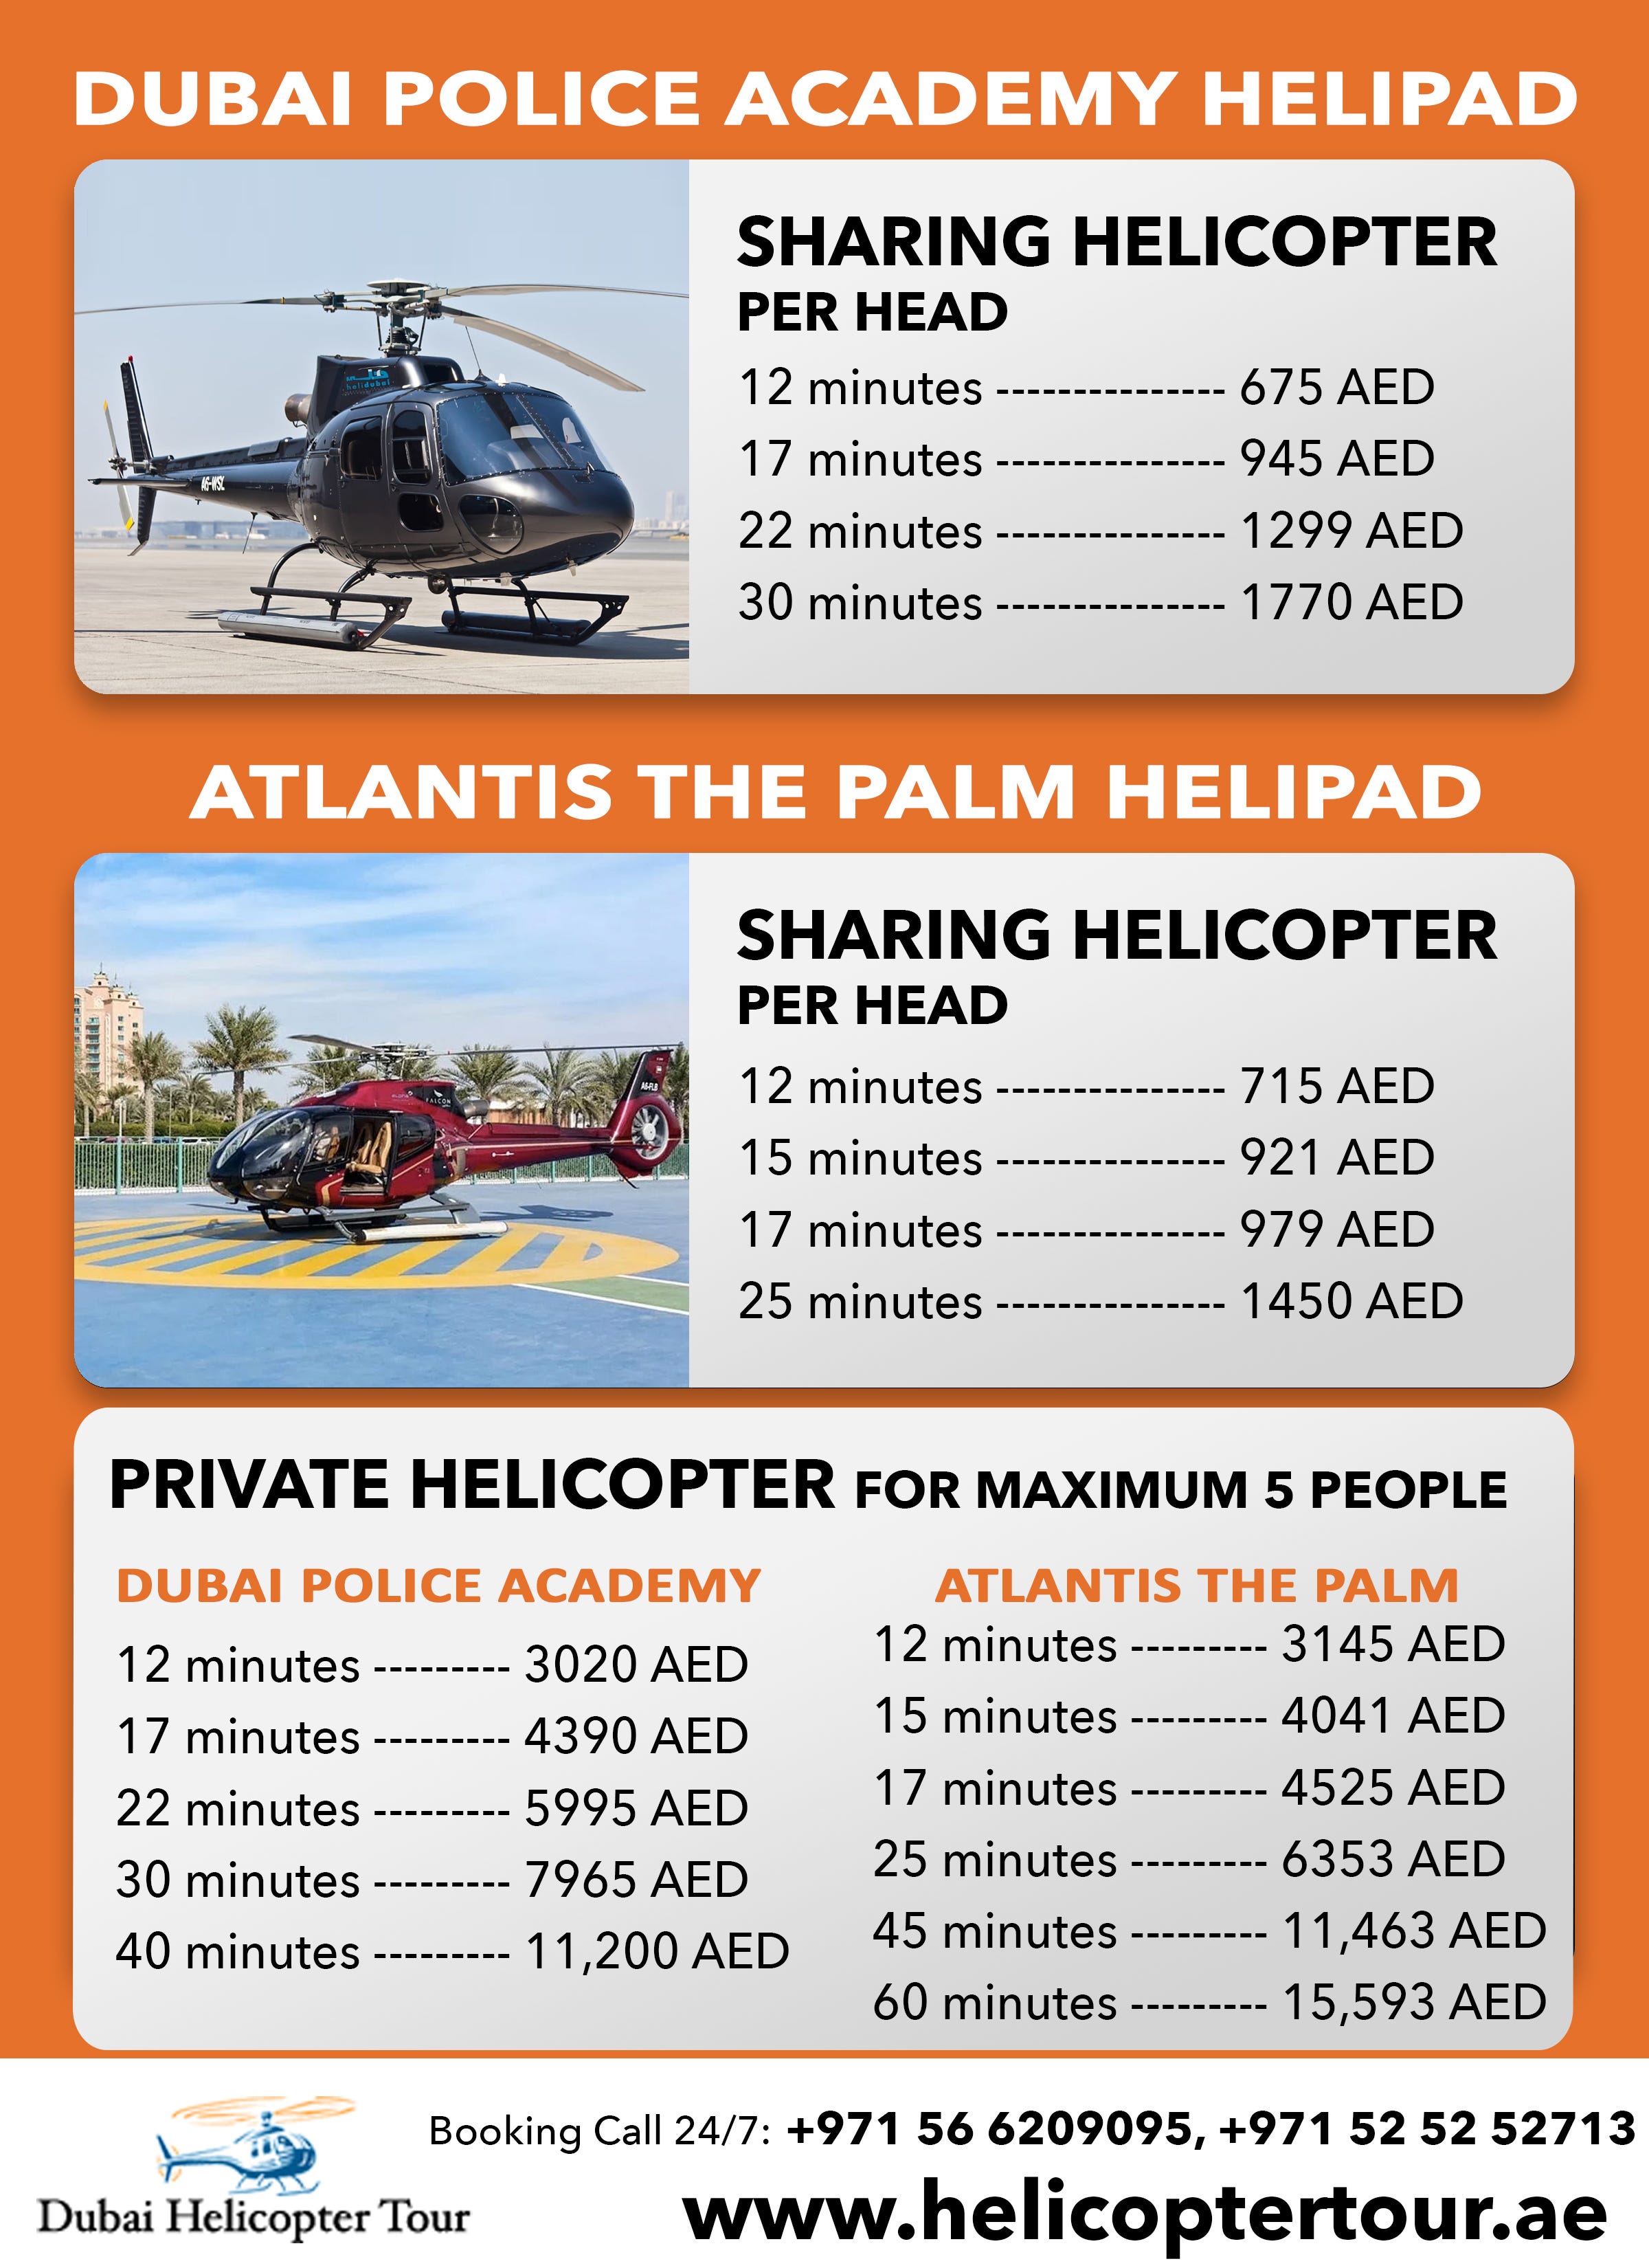 https://www.helicoptertour.ae/Helicopter-Pricelist.jpg